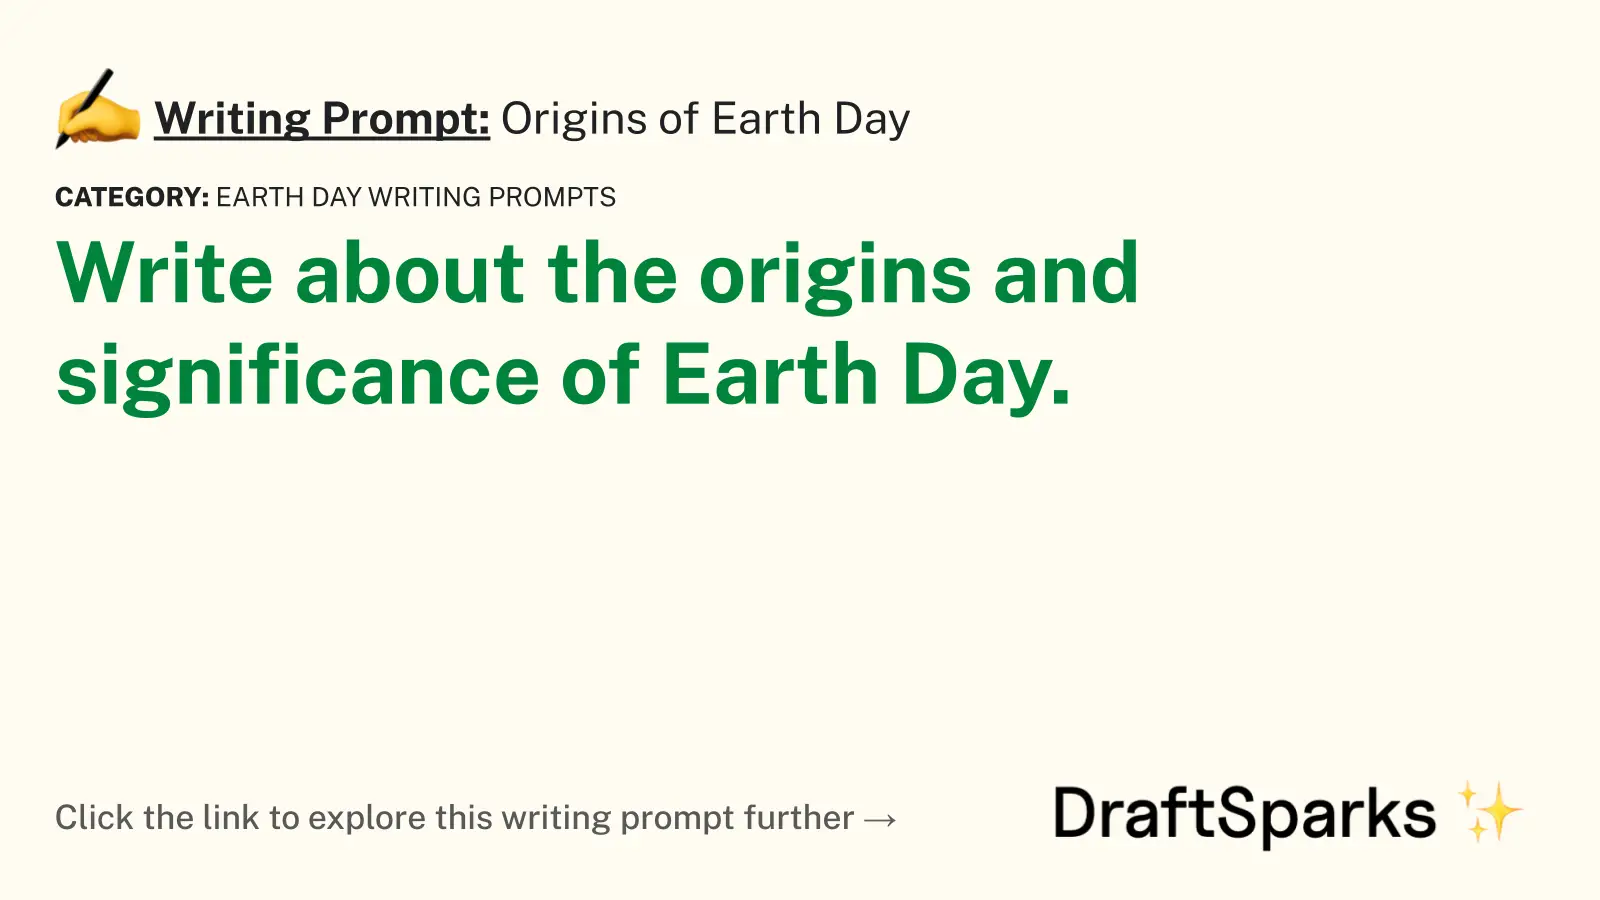 Origins of Earth Day